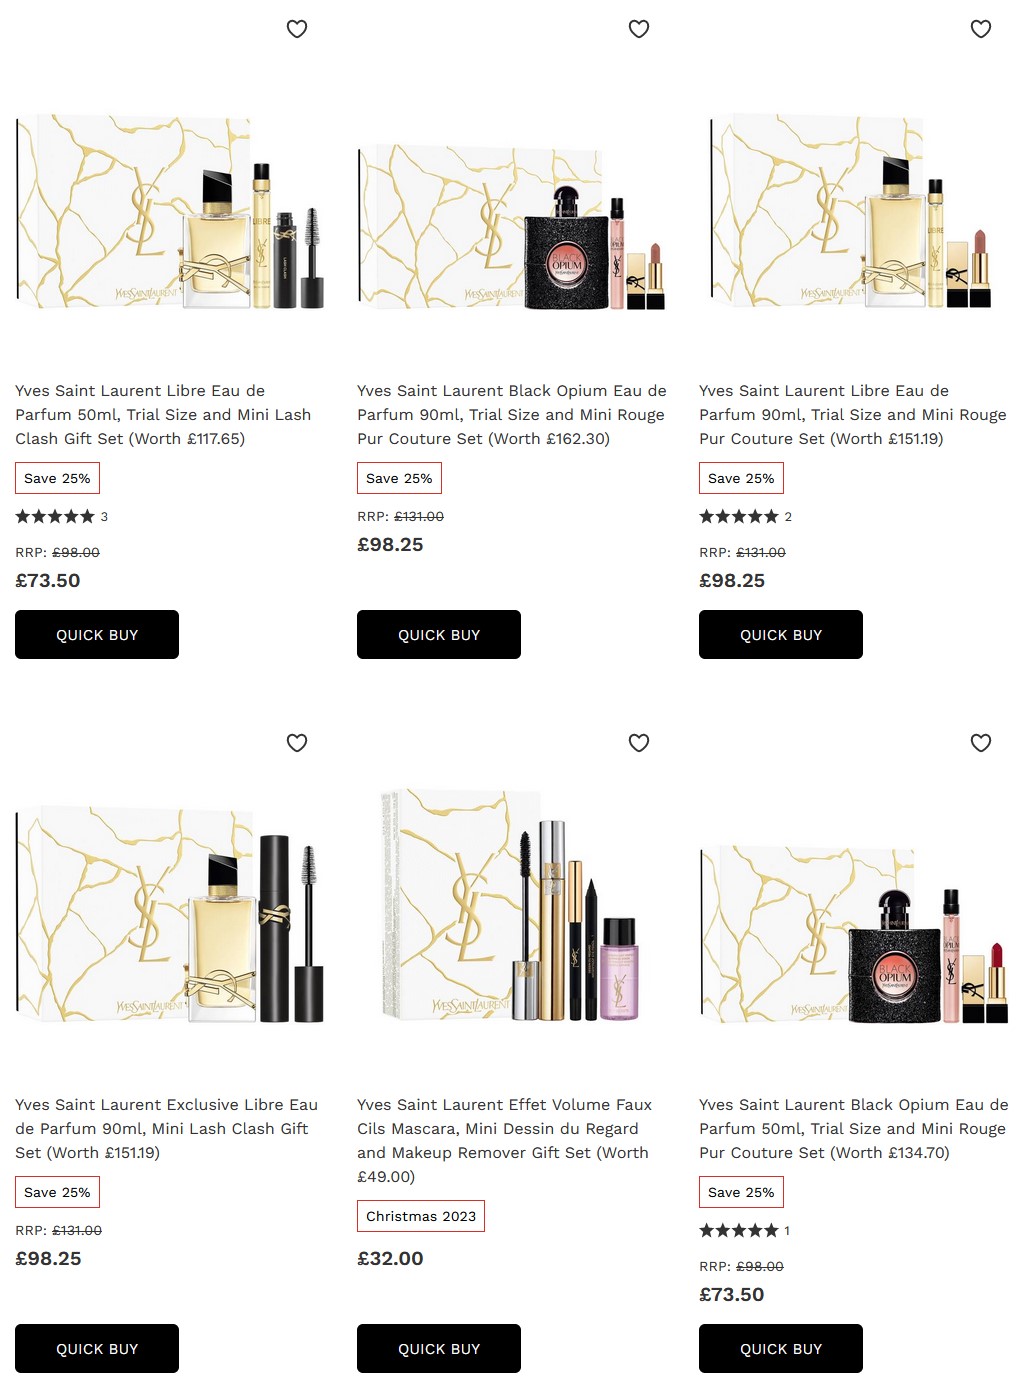 25% off selected YSL Beauty & Fragrance